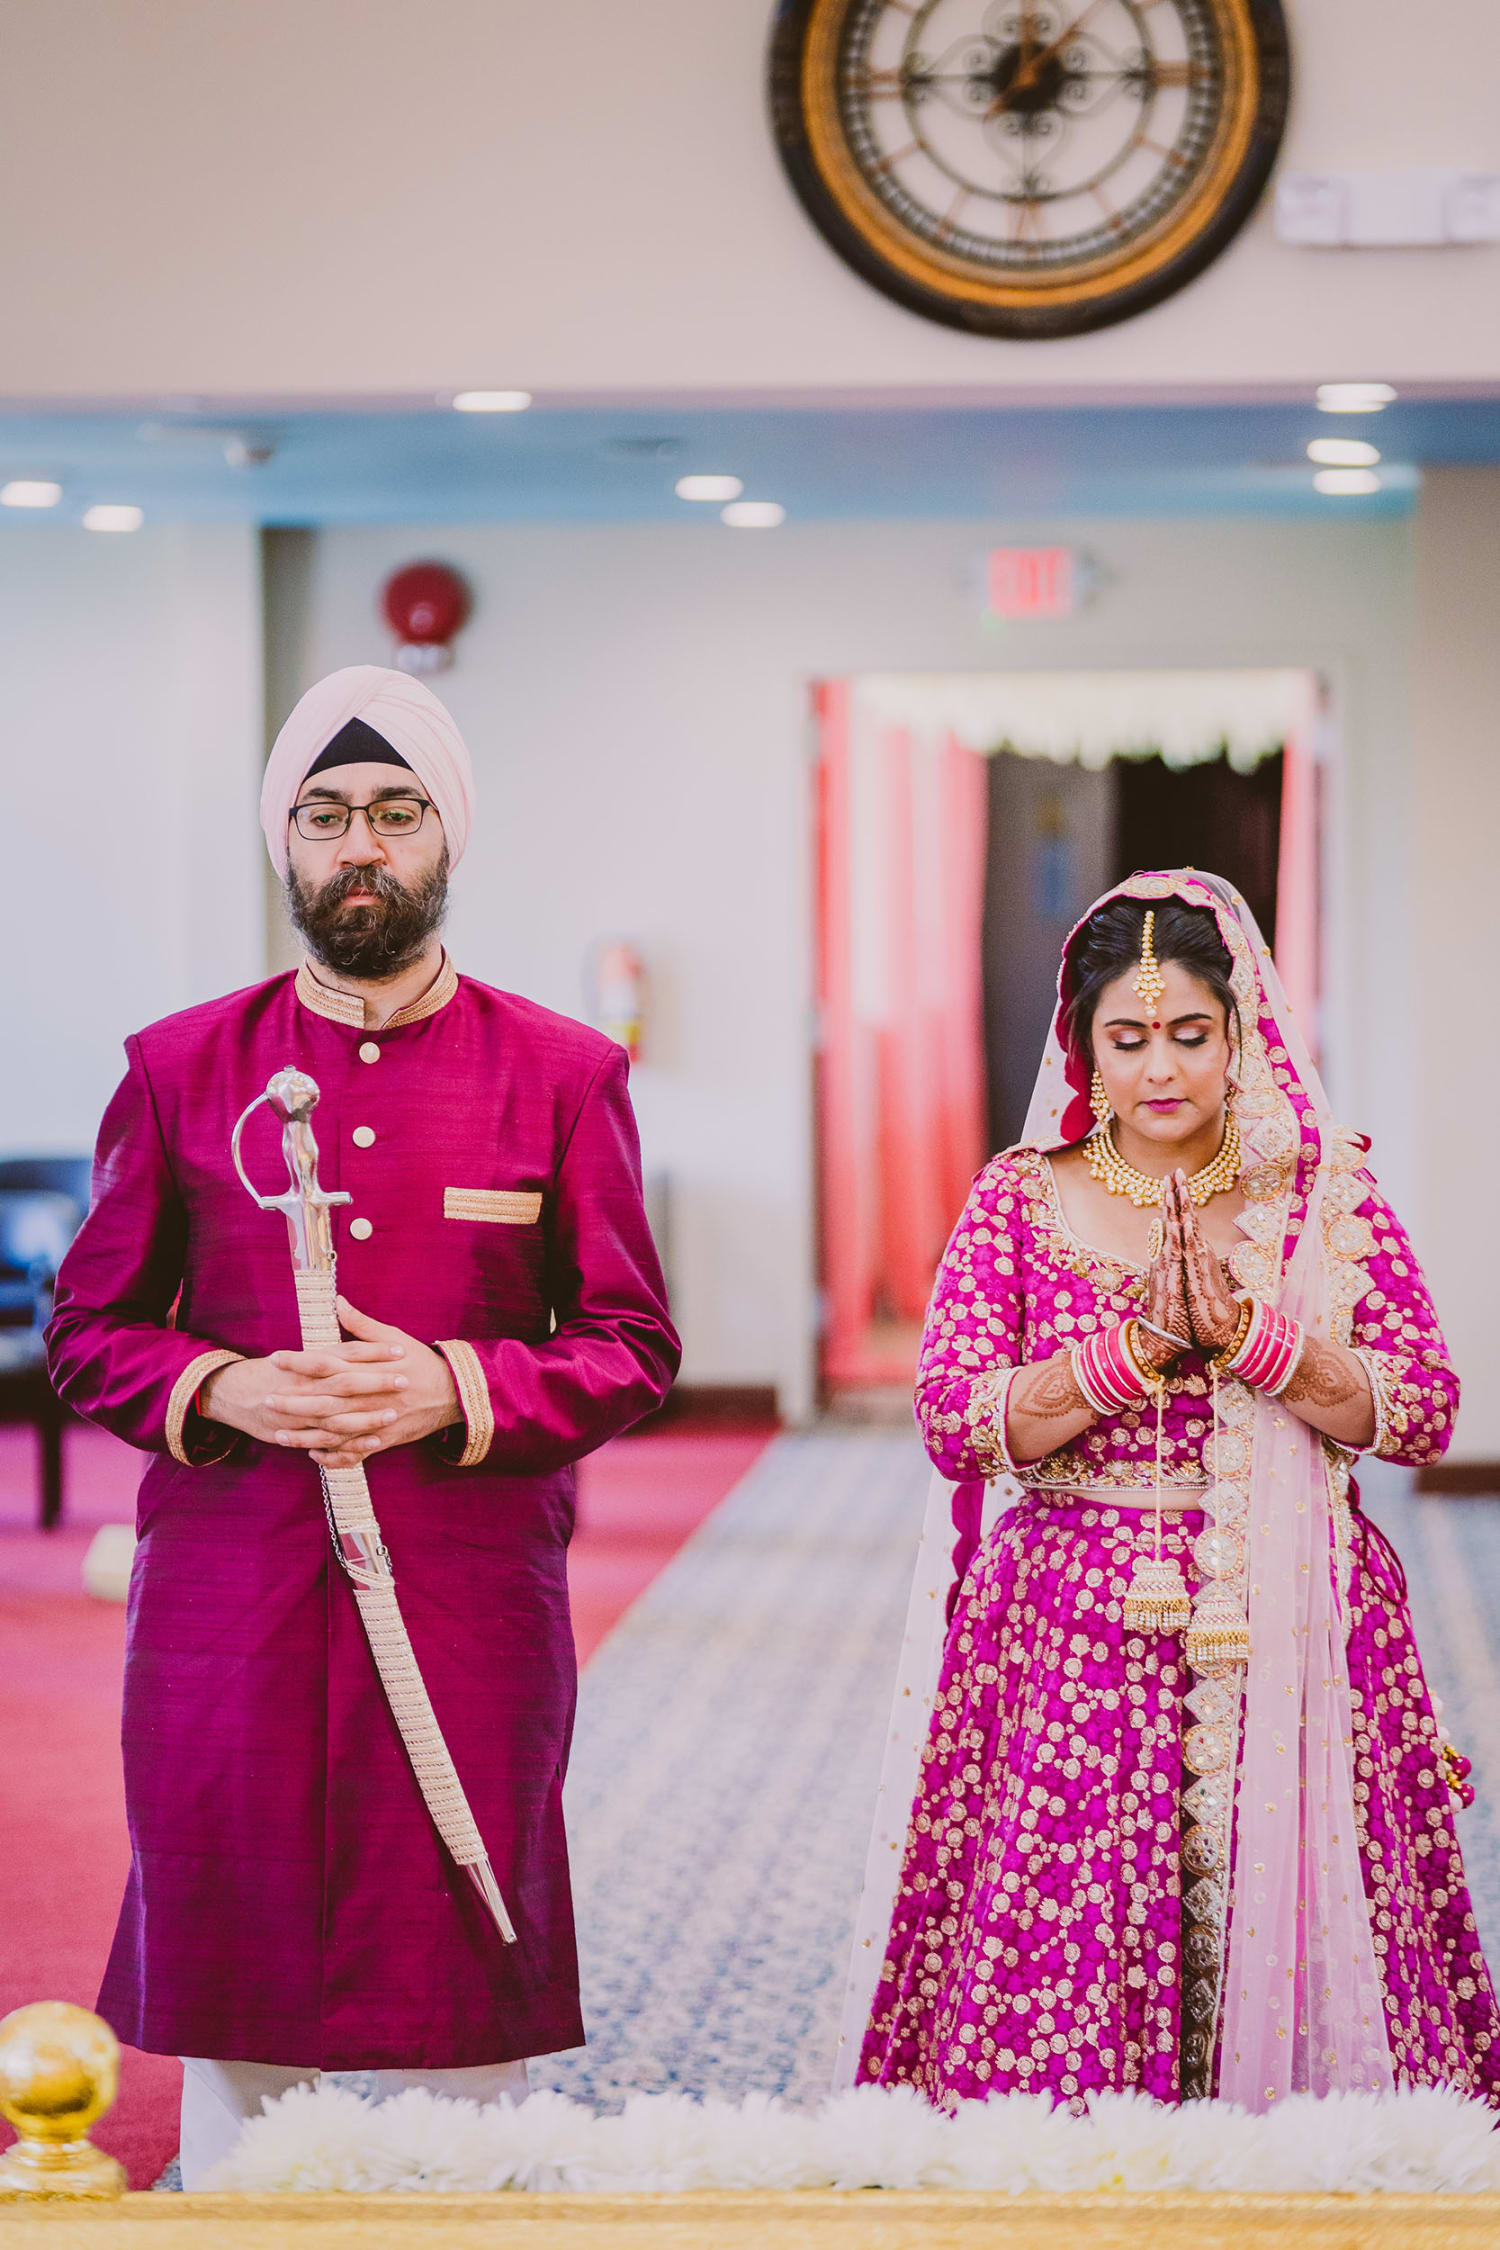 Rupam Kaur from Indian Matchmaking is married — without any help from the show